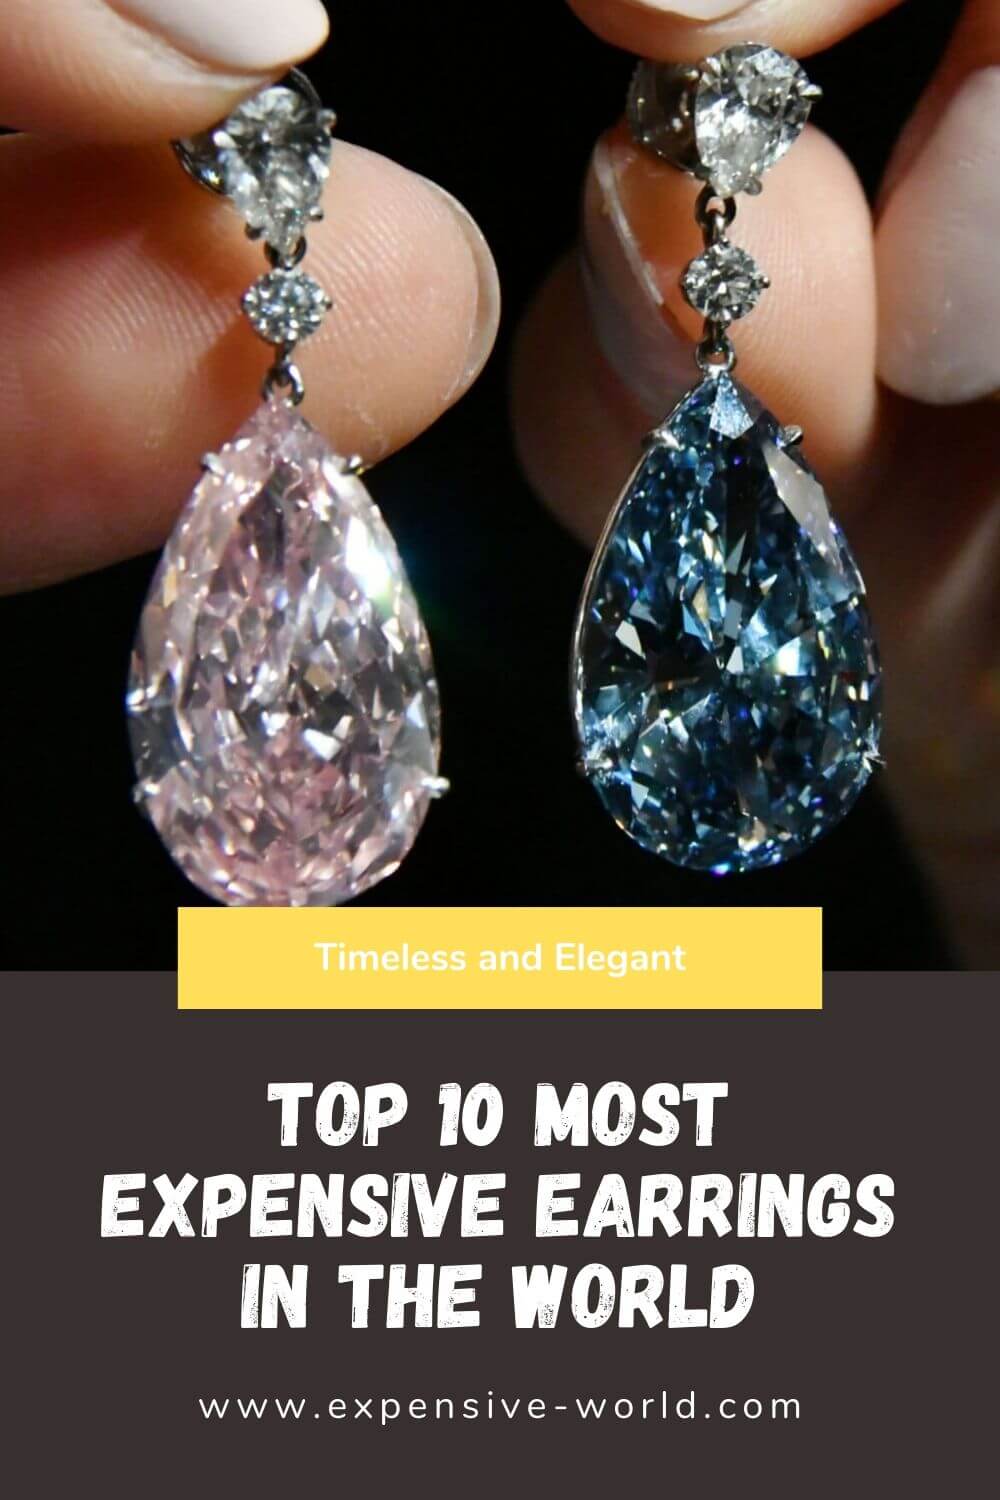 Top 10 Most Expensive Earrings in the World